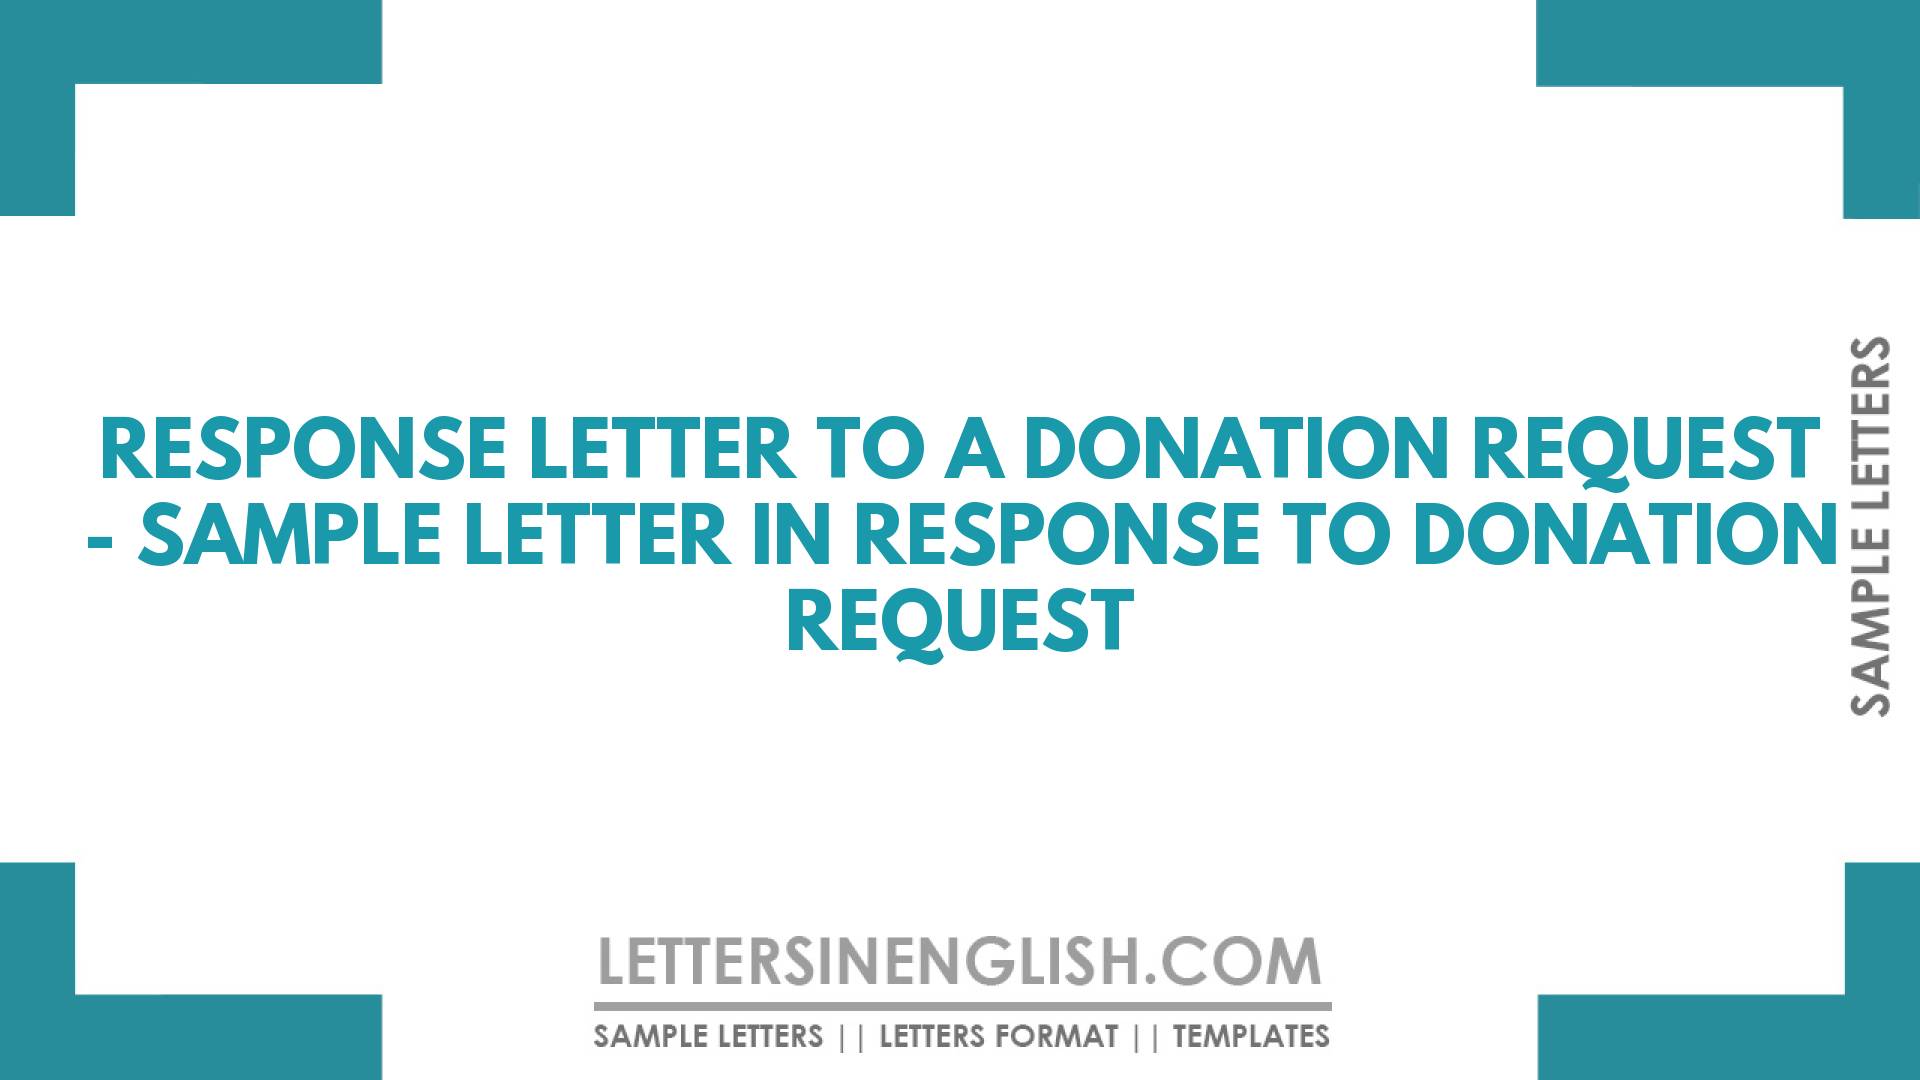 Response Letter to a Donation Request – Sample Letter in Response to Donation Request